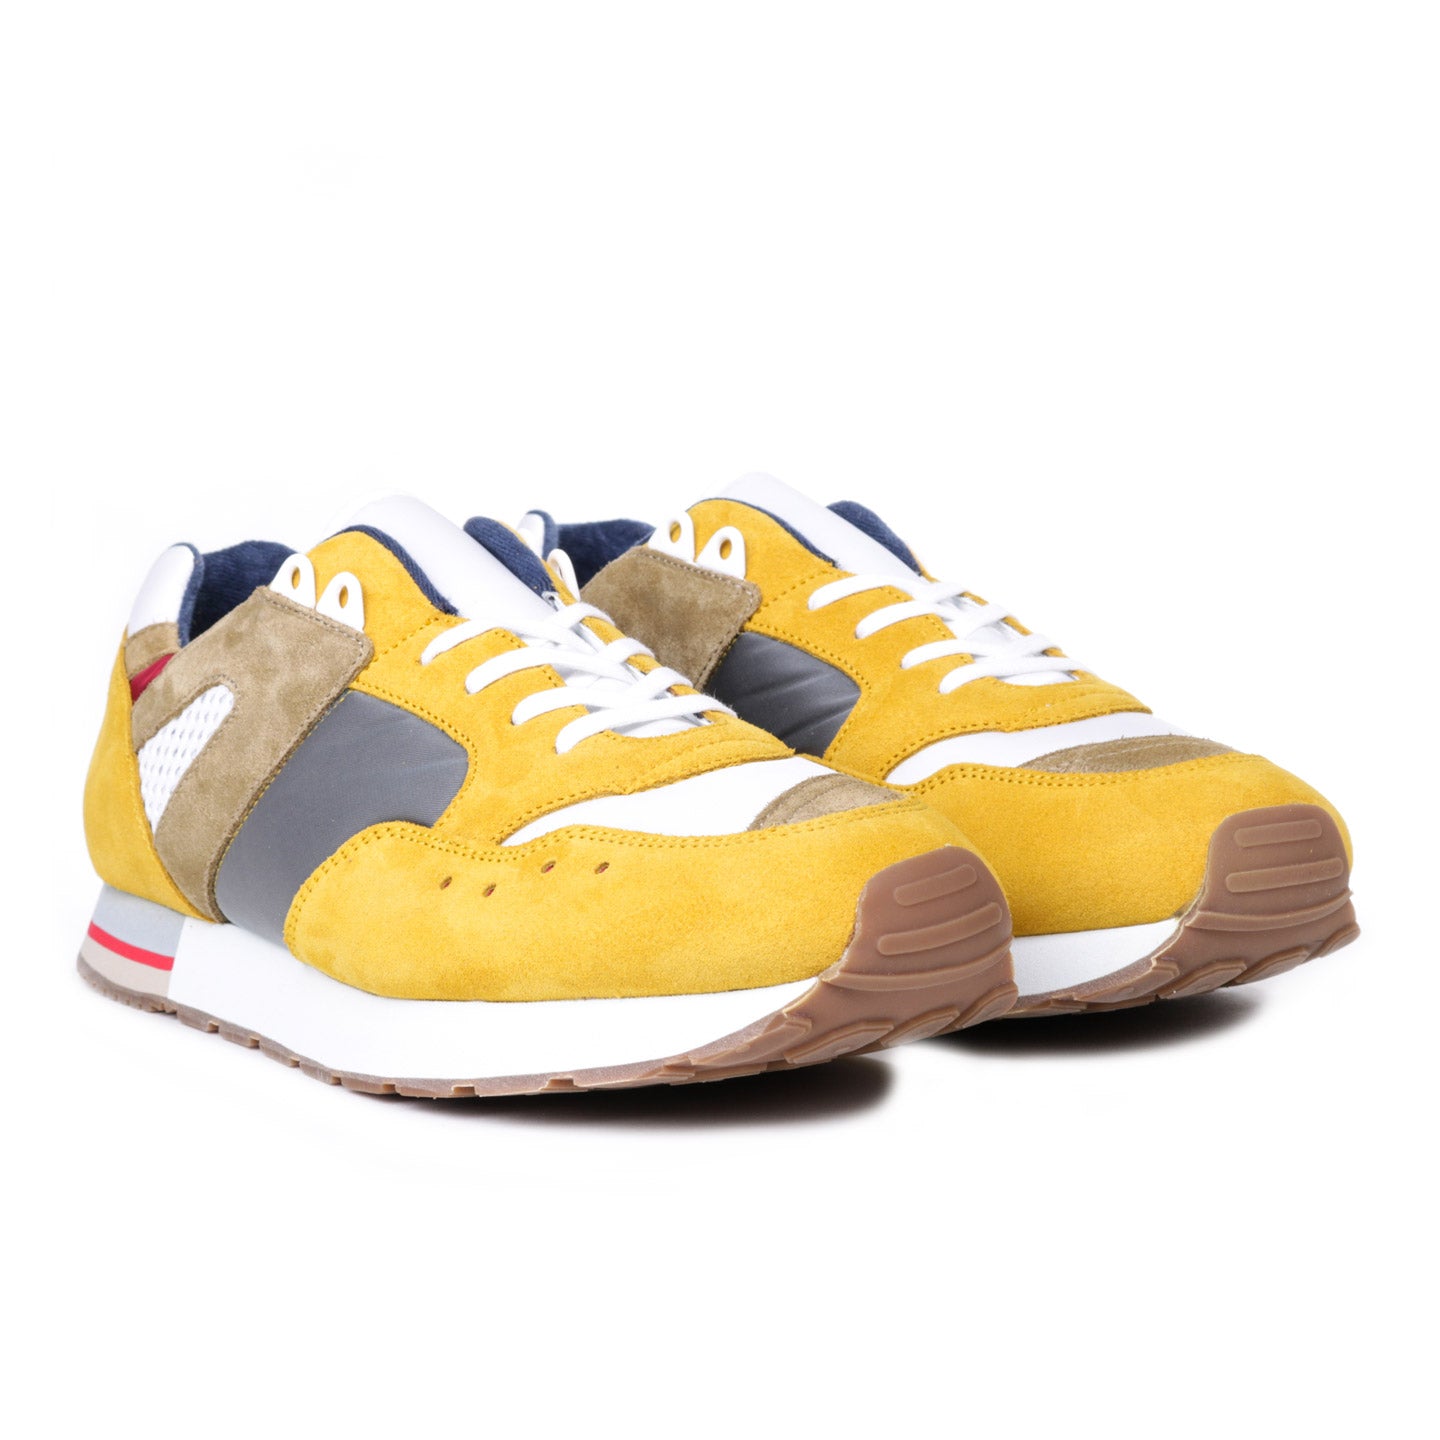 REPRODUCTION OF FOUND FRENCH MILITARY TRAINER SILVER / YELLOW